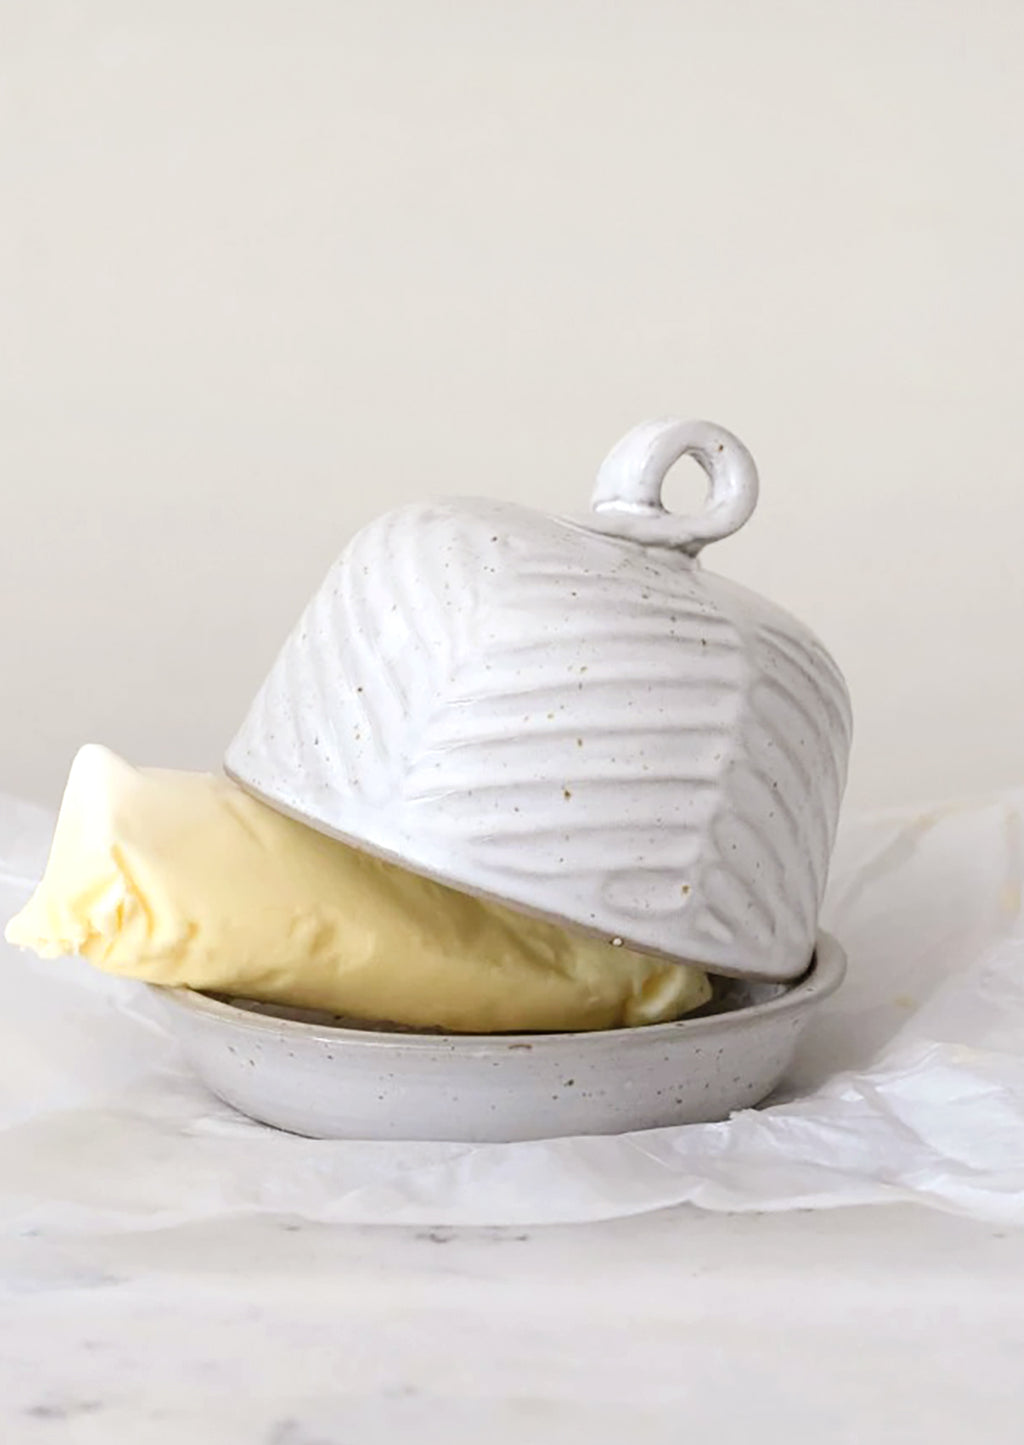 1: A ceramic butter dome in round shape with texture.